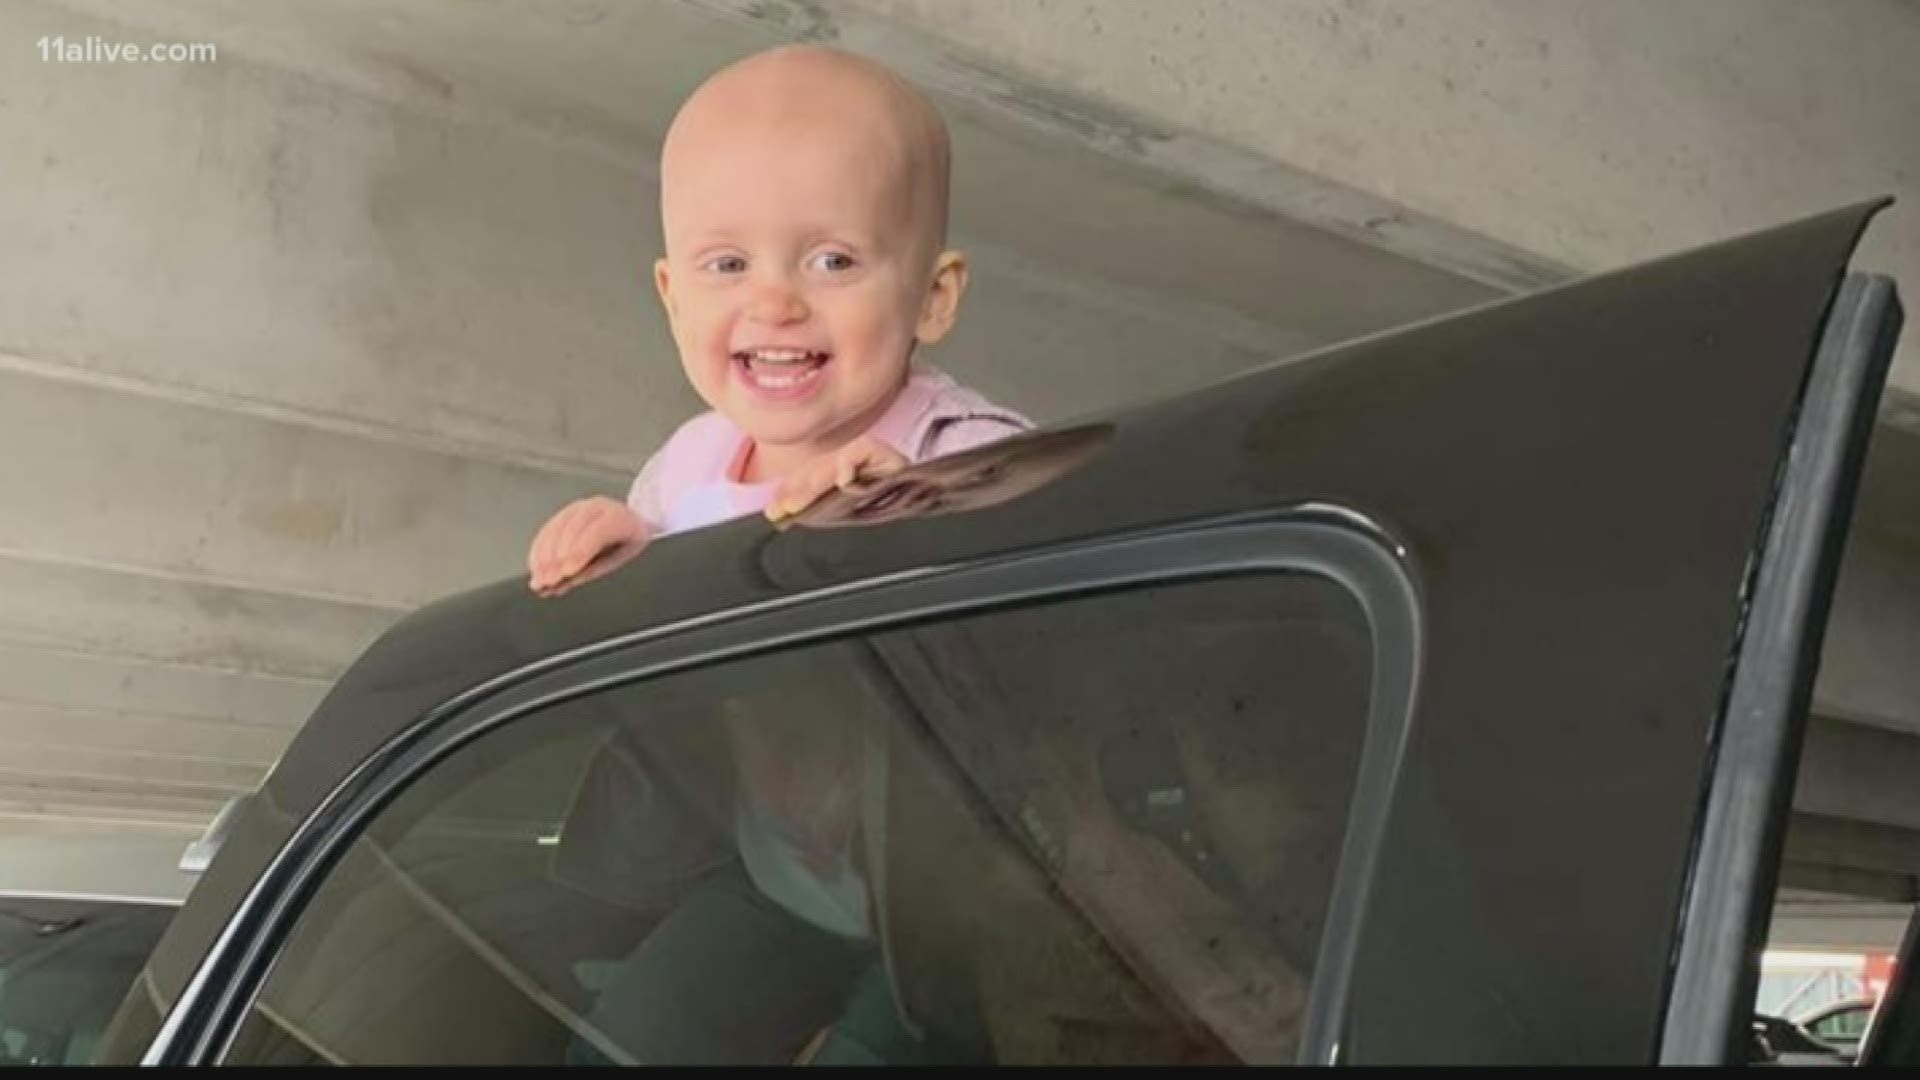 Hailey Holder was in Atlanta for an oncology meeting early Wednesday morning, but when her parents got to their car, they found everything they left inside missing.